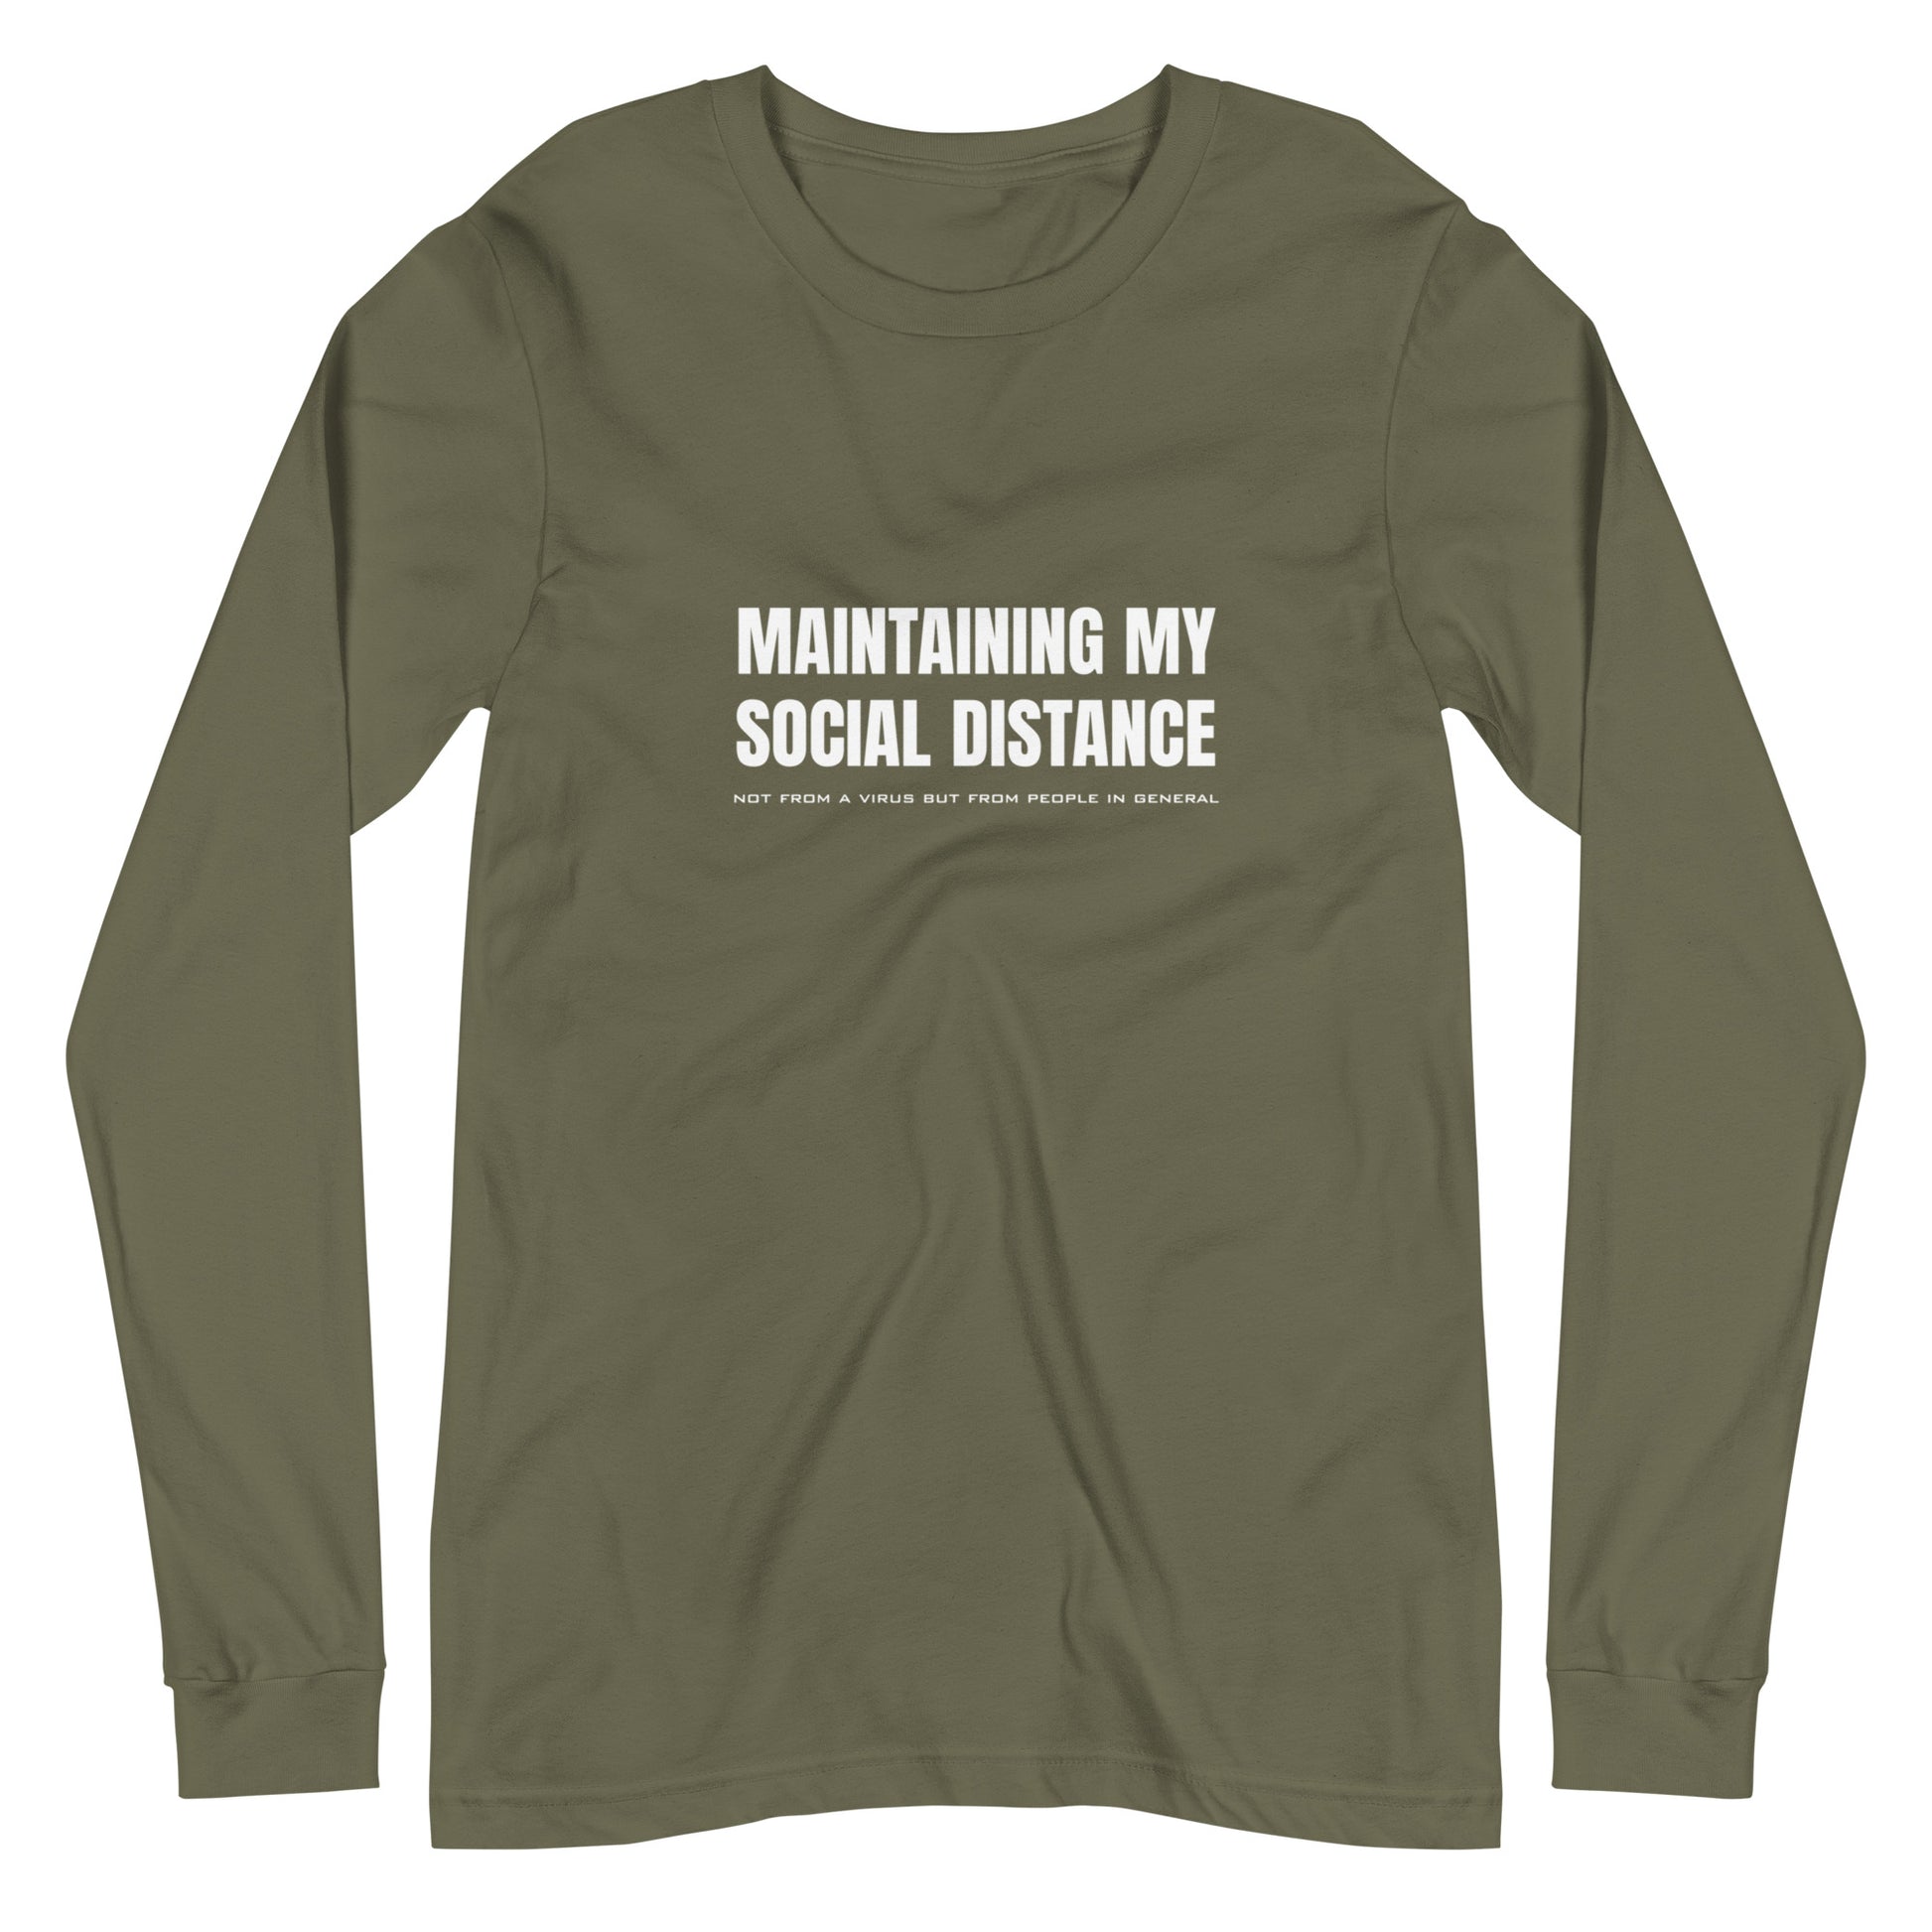 Military Green (olive tan) long sleeve t-shirt with white graphic: "MAINTAINING MY SOCIAL DISTANCE not from a virus but from people in general"